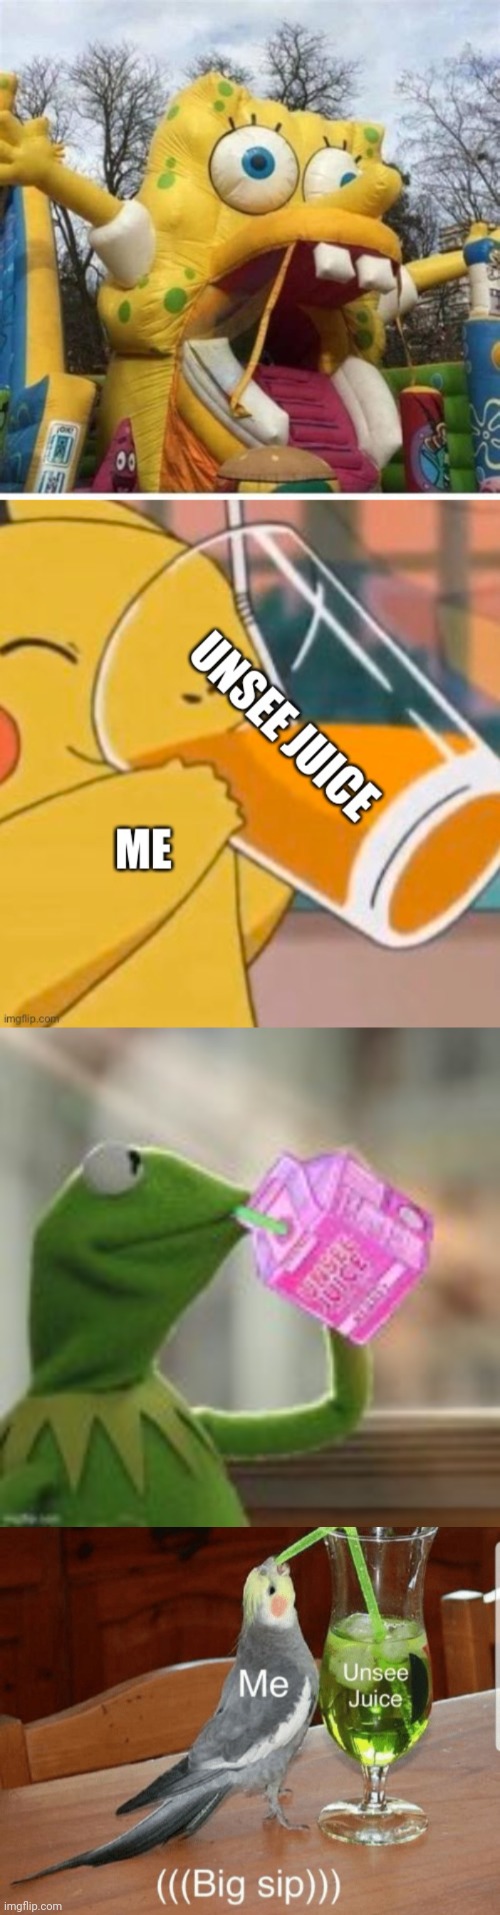 Where's the unsee juice when u need it | image tagged in unsee juice,kermit sipping on unsee juice | made w/ Imgflip meme maker